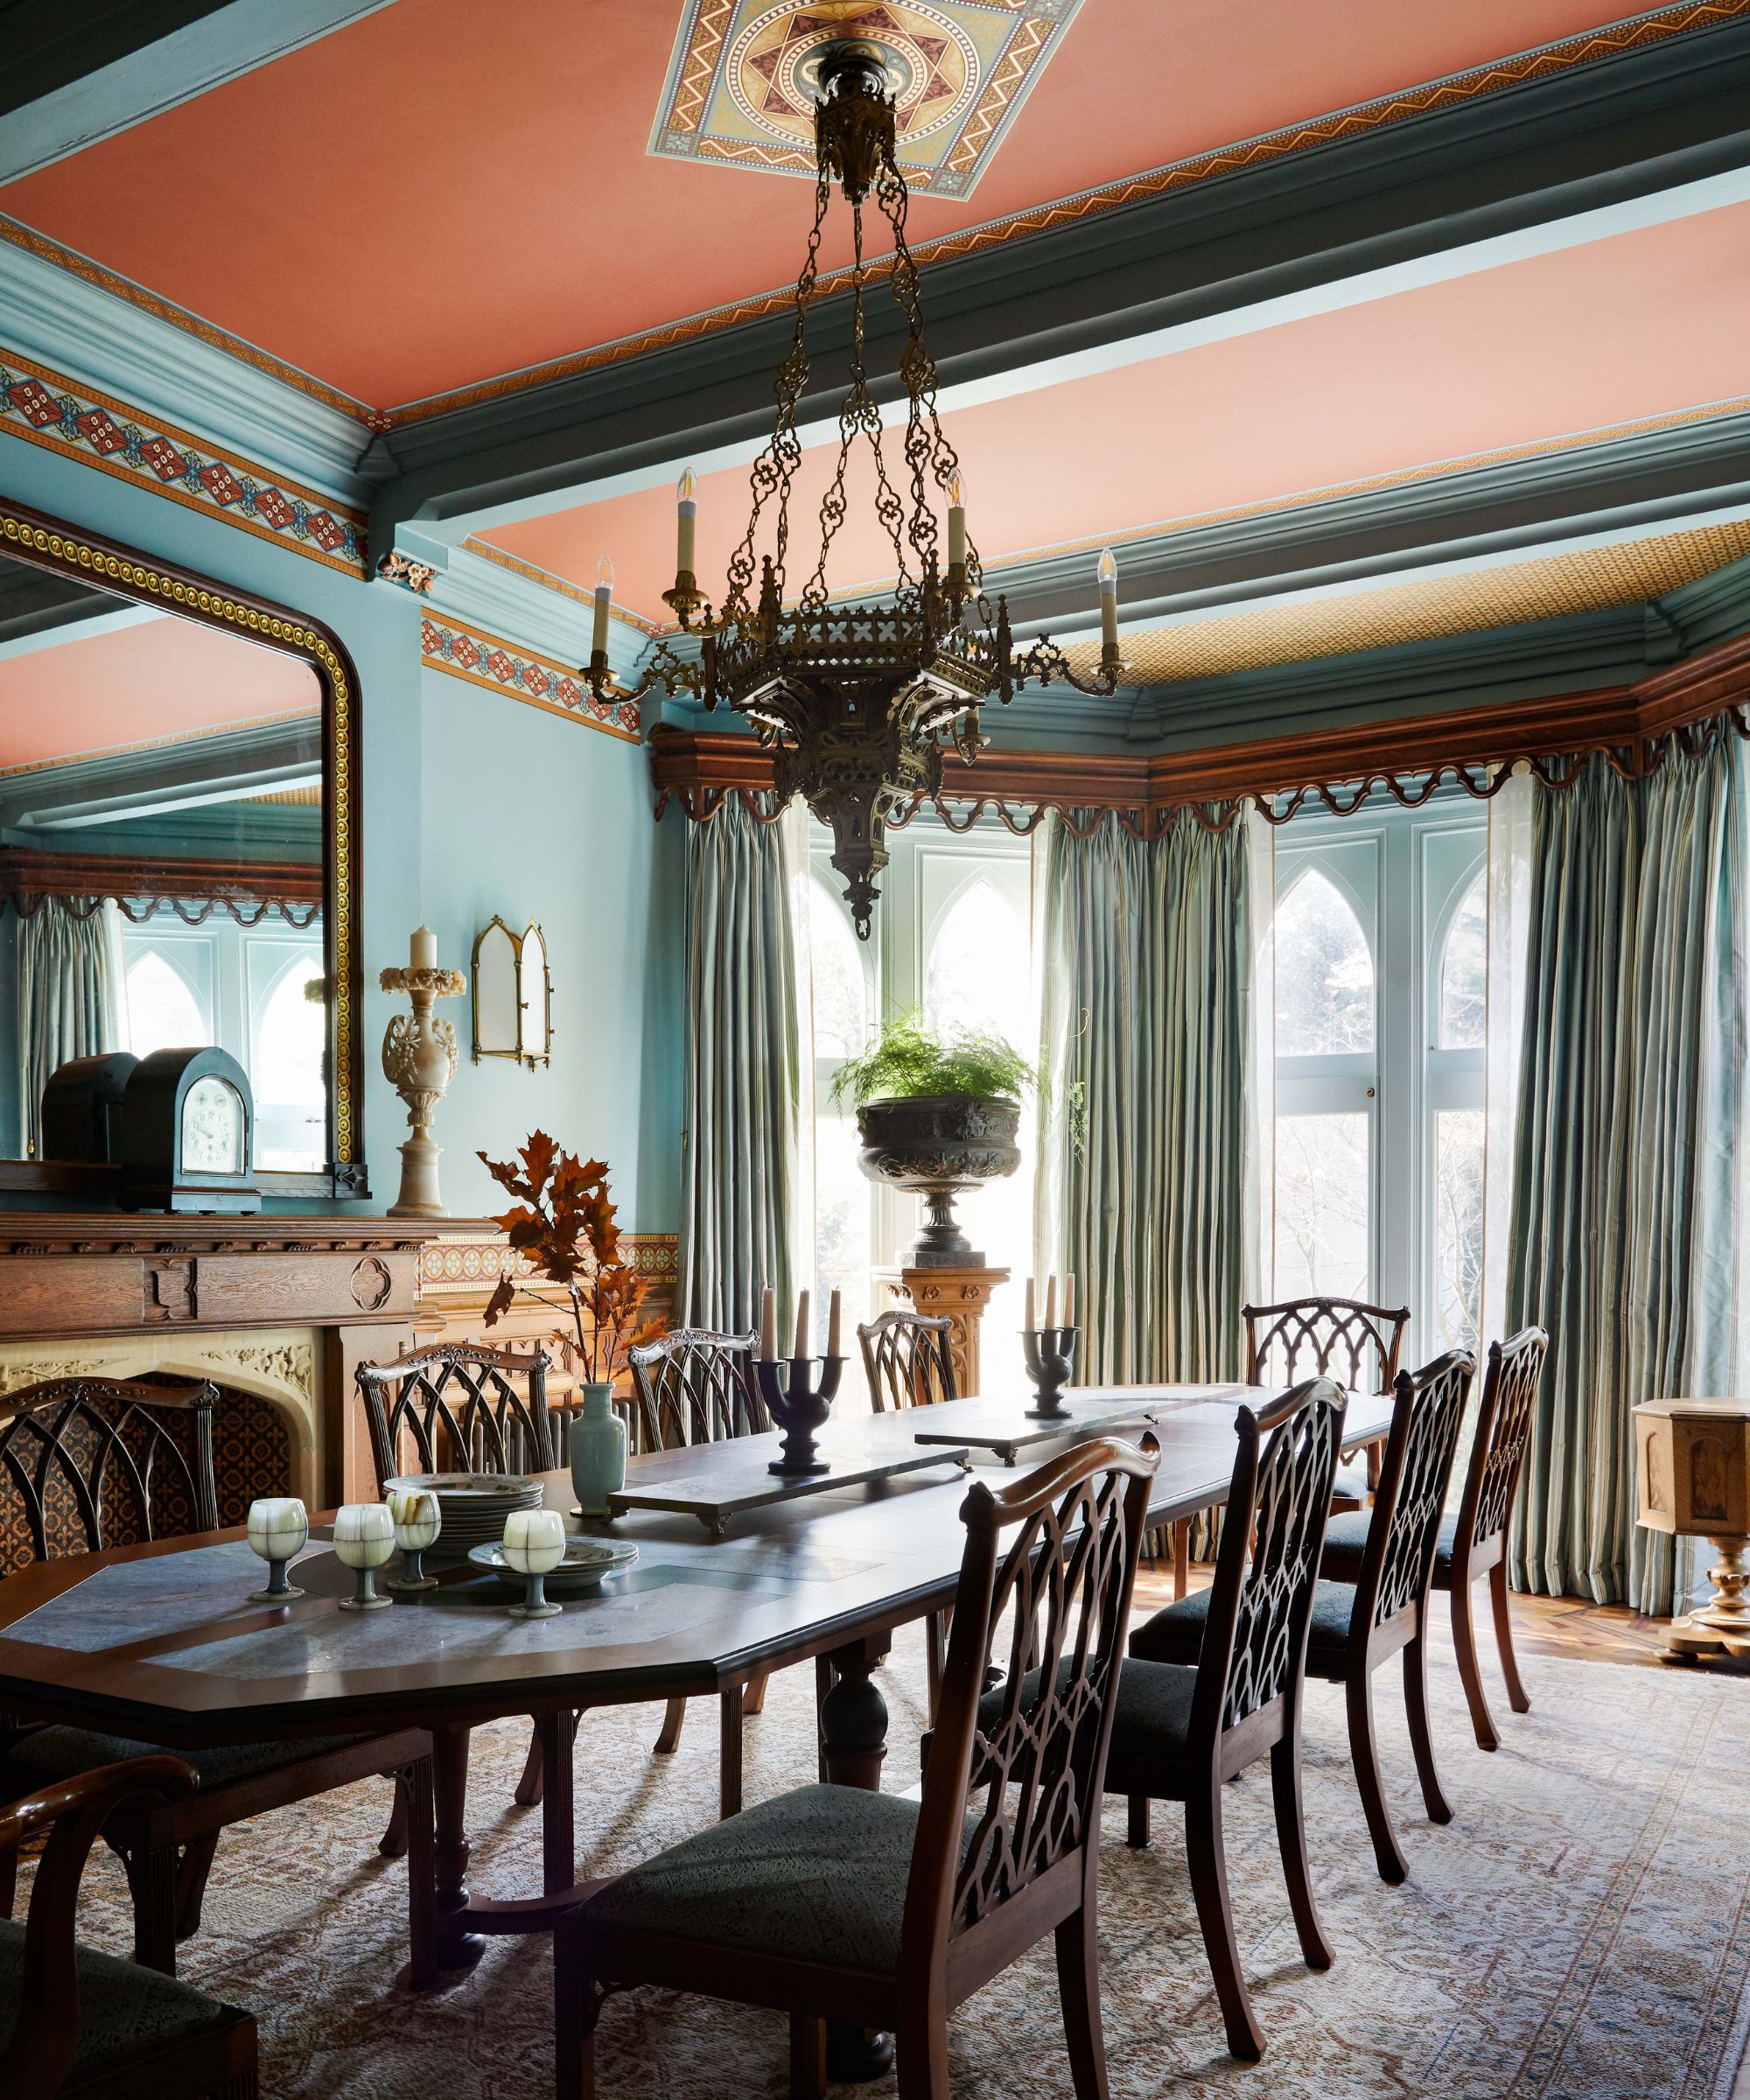 Gothic dining room with a chandelier of the era